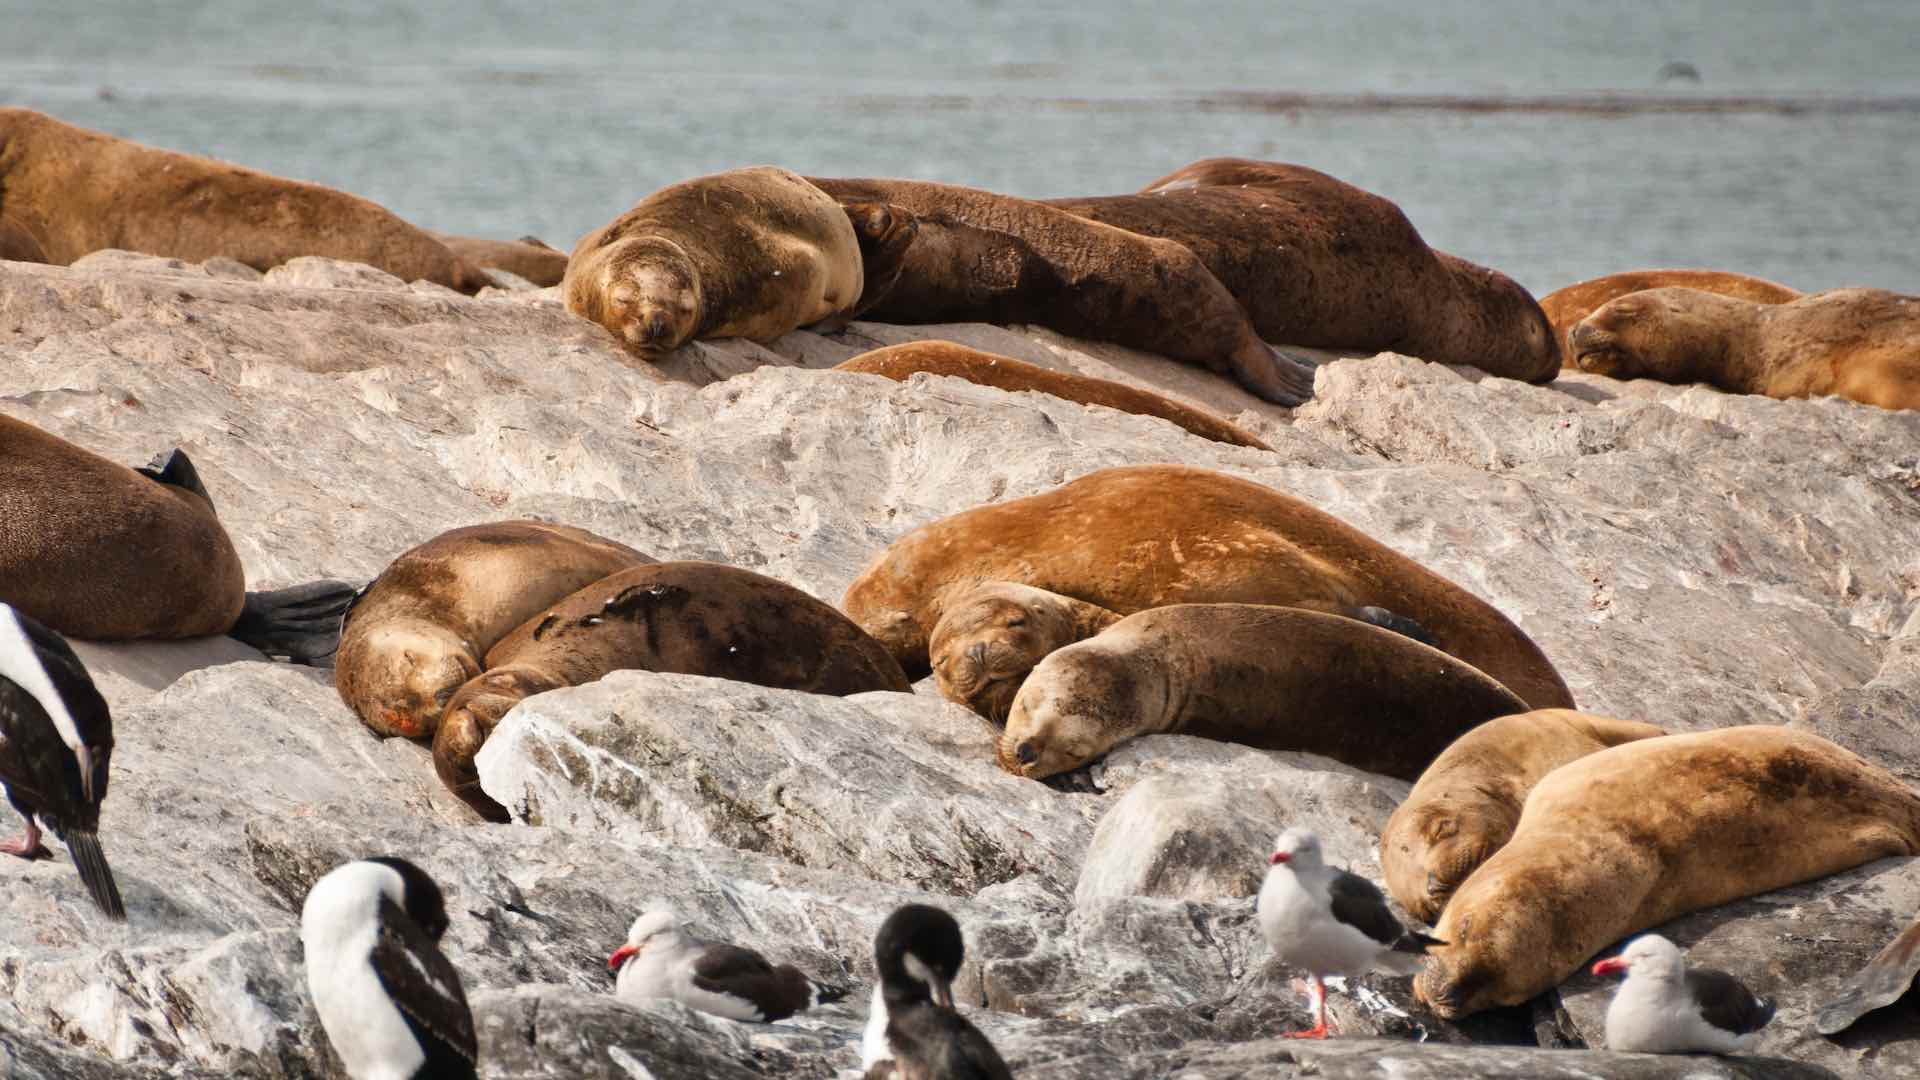 Unprecedented HPAI virus hits southern Brazil, affecting over 900 seals and sea lions